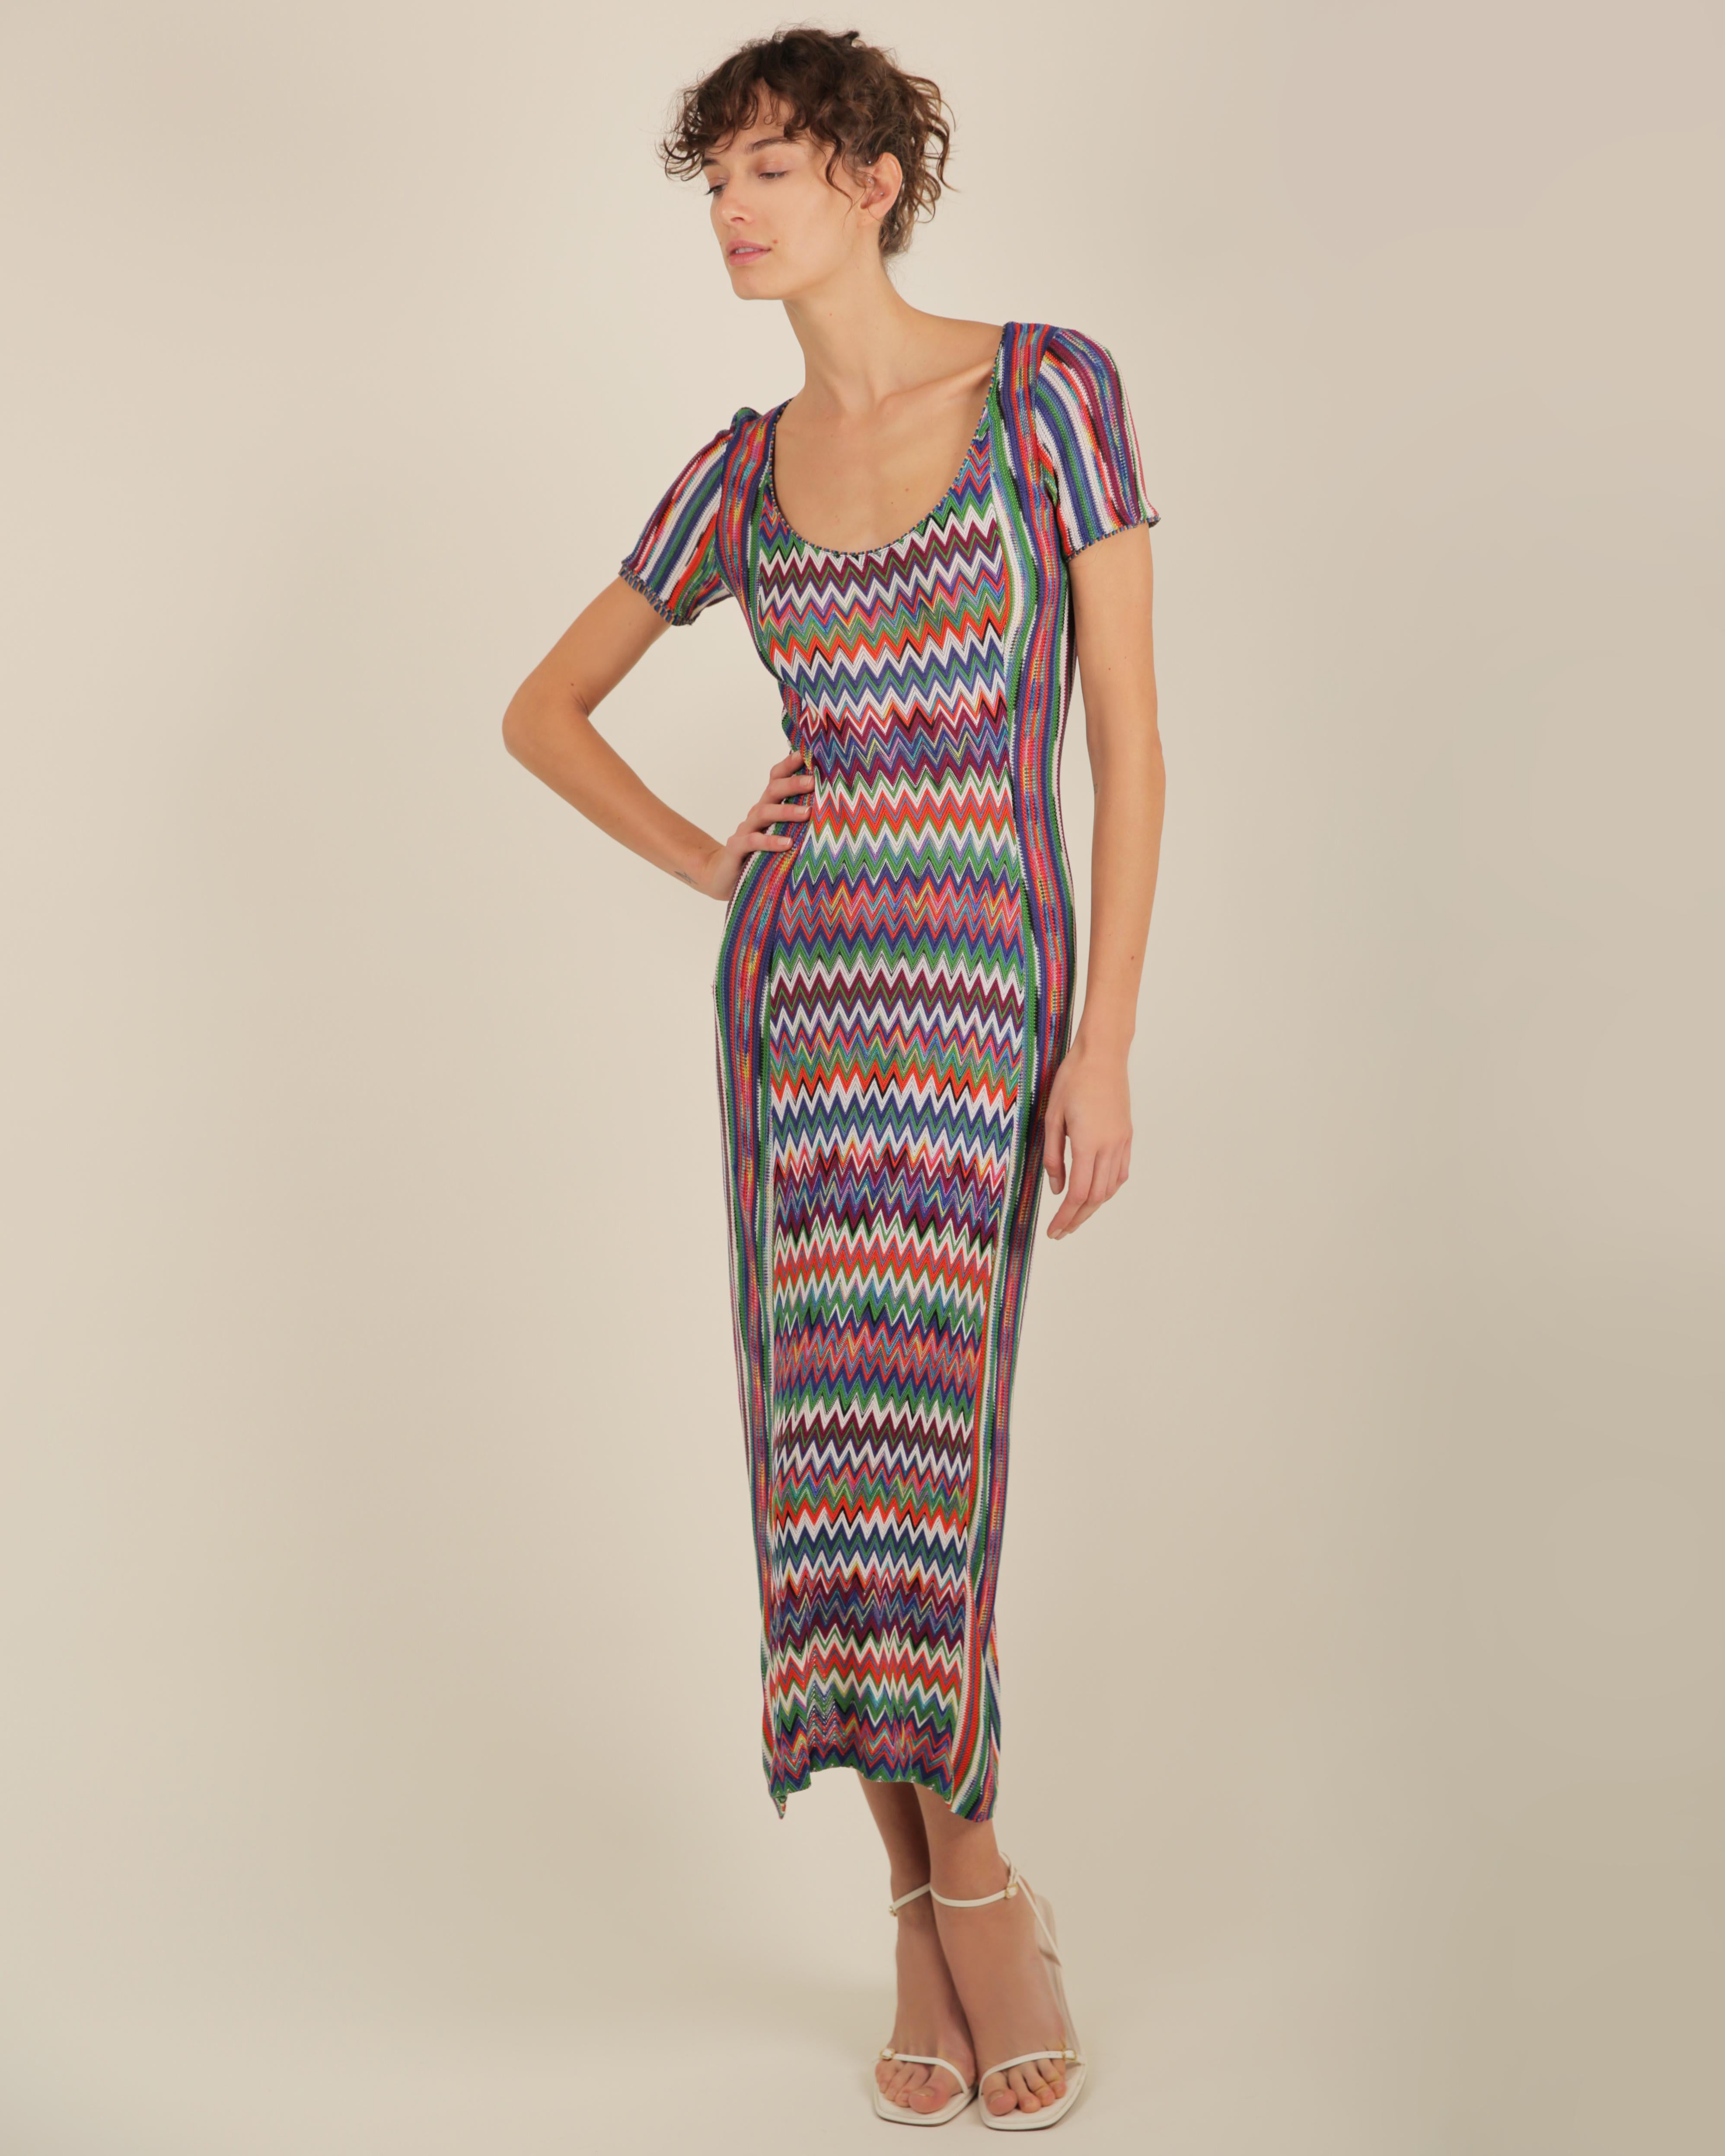 LOVE LALI Vintage

Vintage Missoni for Nieman Marcus multicolour chevron and stripe knit dress
Scoop neck with short sleeves
Would also work wonderfully as a beach cover up
MADE IN ITALY

Composition:
No composition label

Size:
No size label -